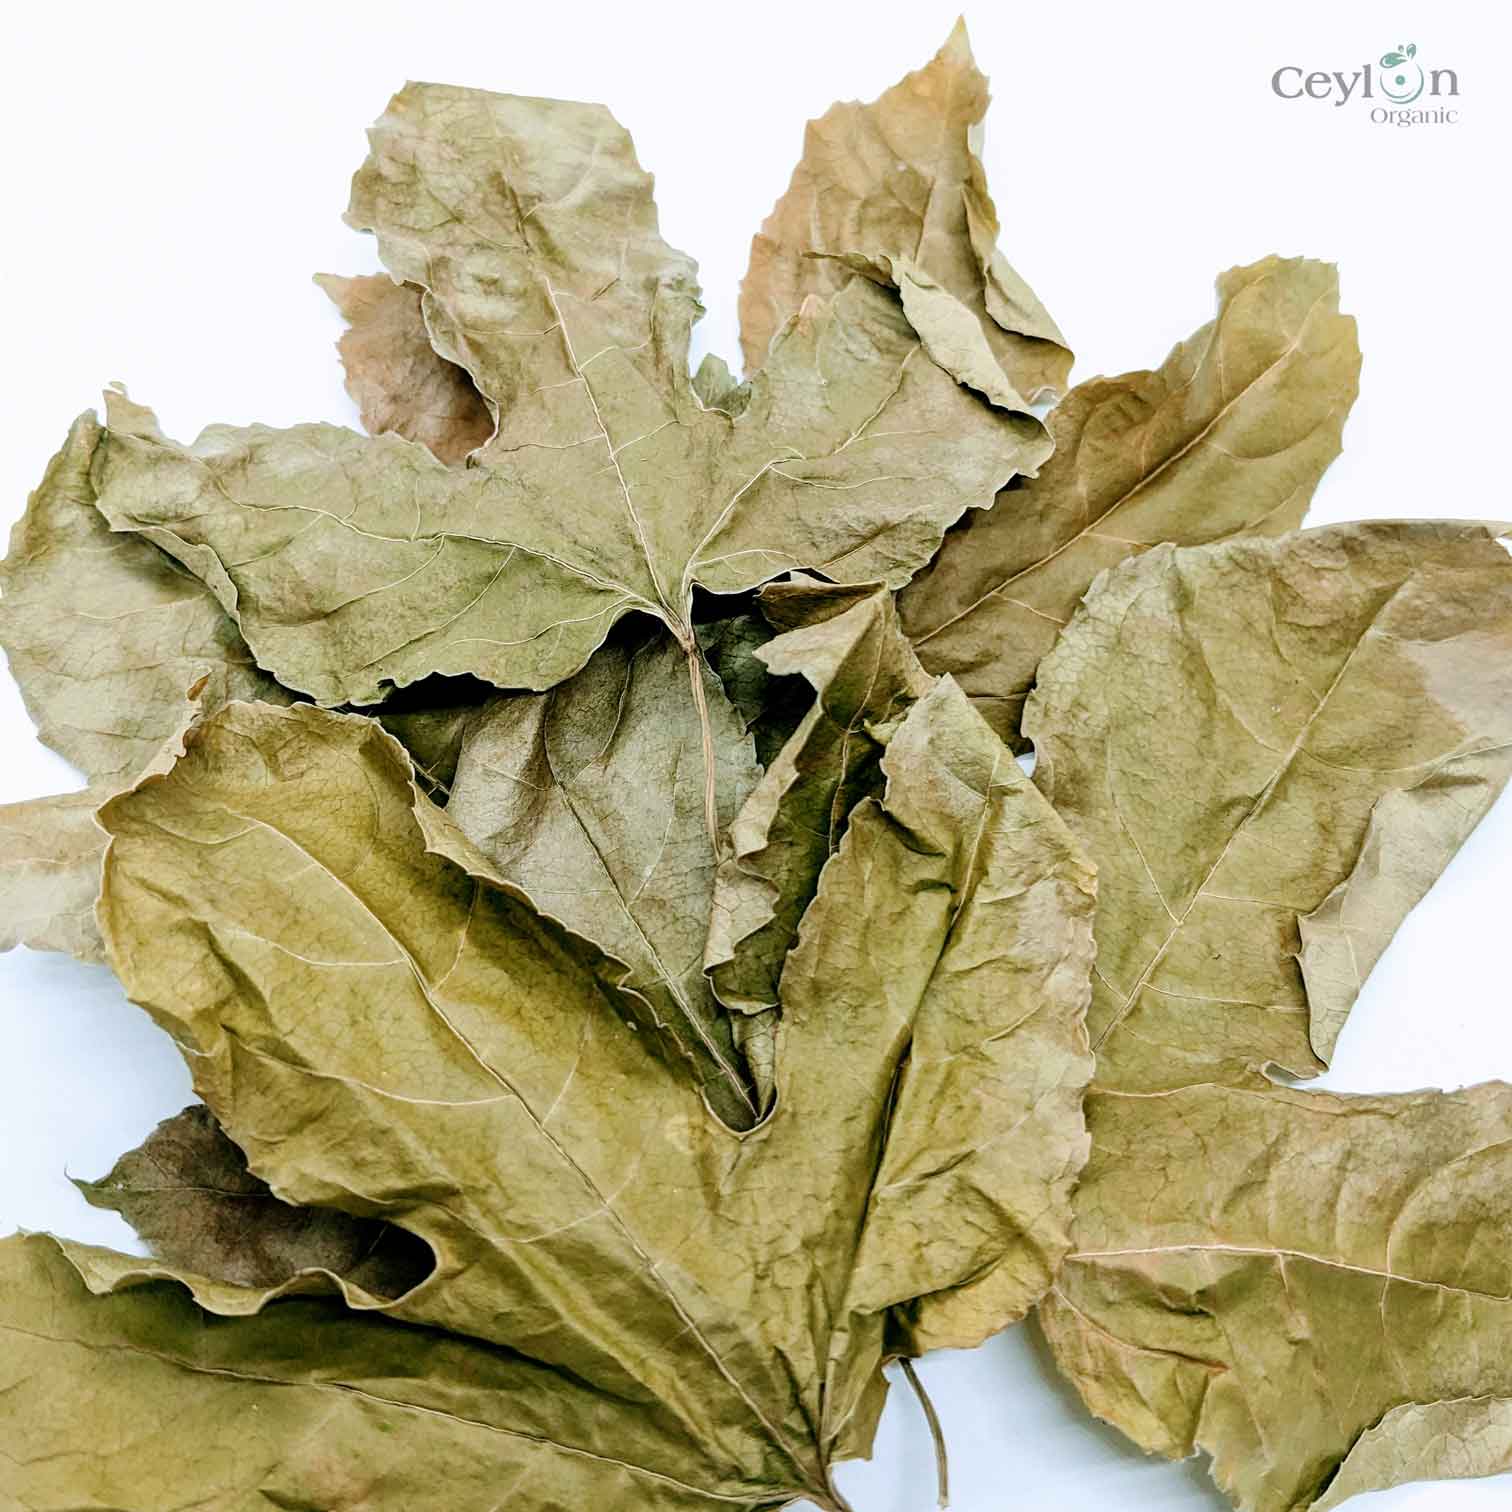 500+ Passion Fruit,Dried Passion Fruit Leaves,Dried Natural Passion Fruit Leaves | Ceylon organic-3